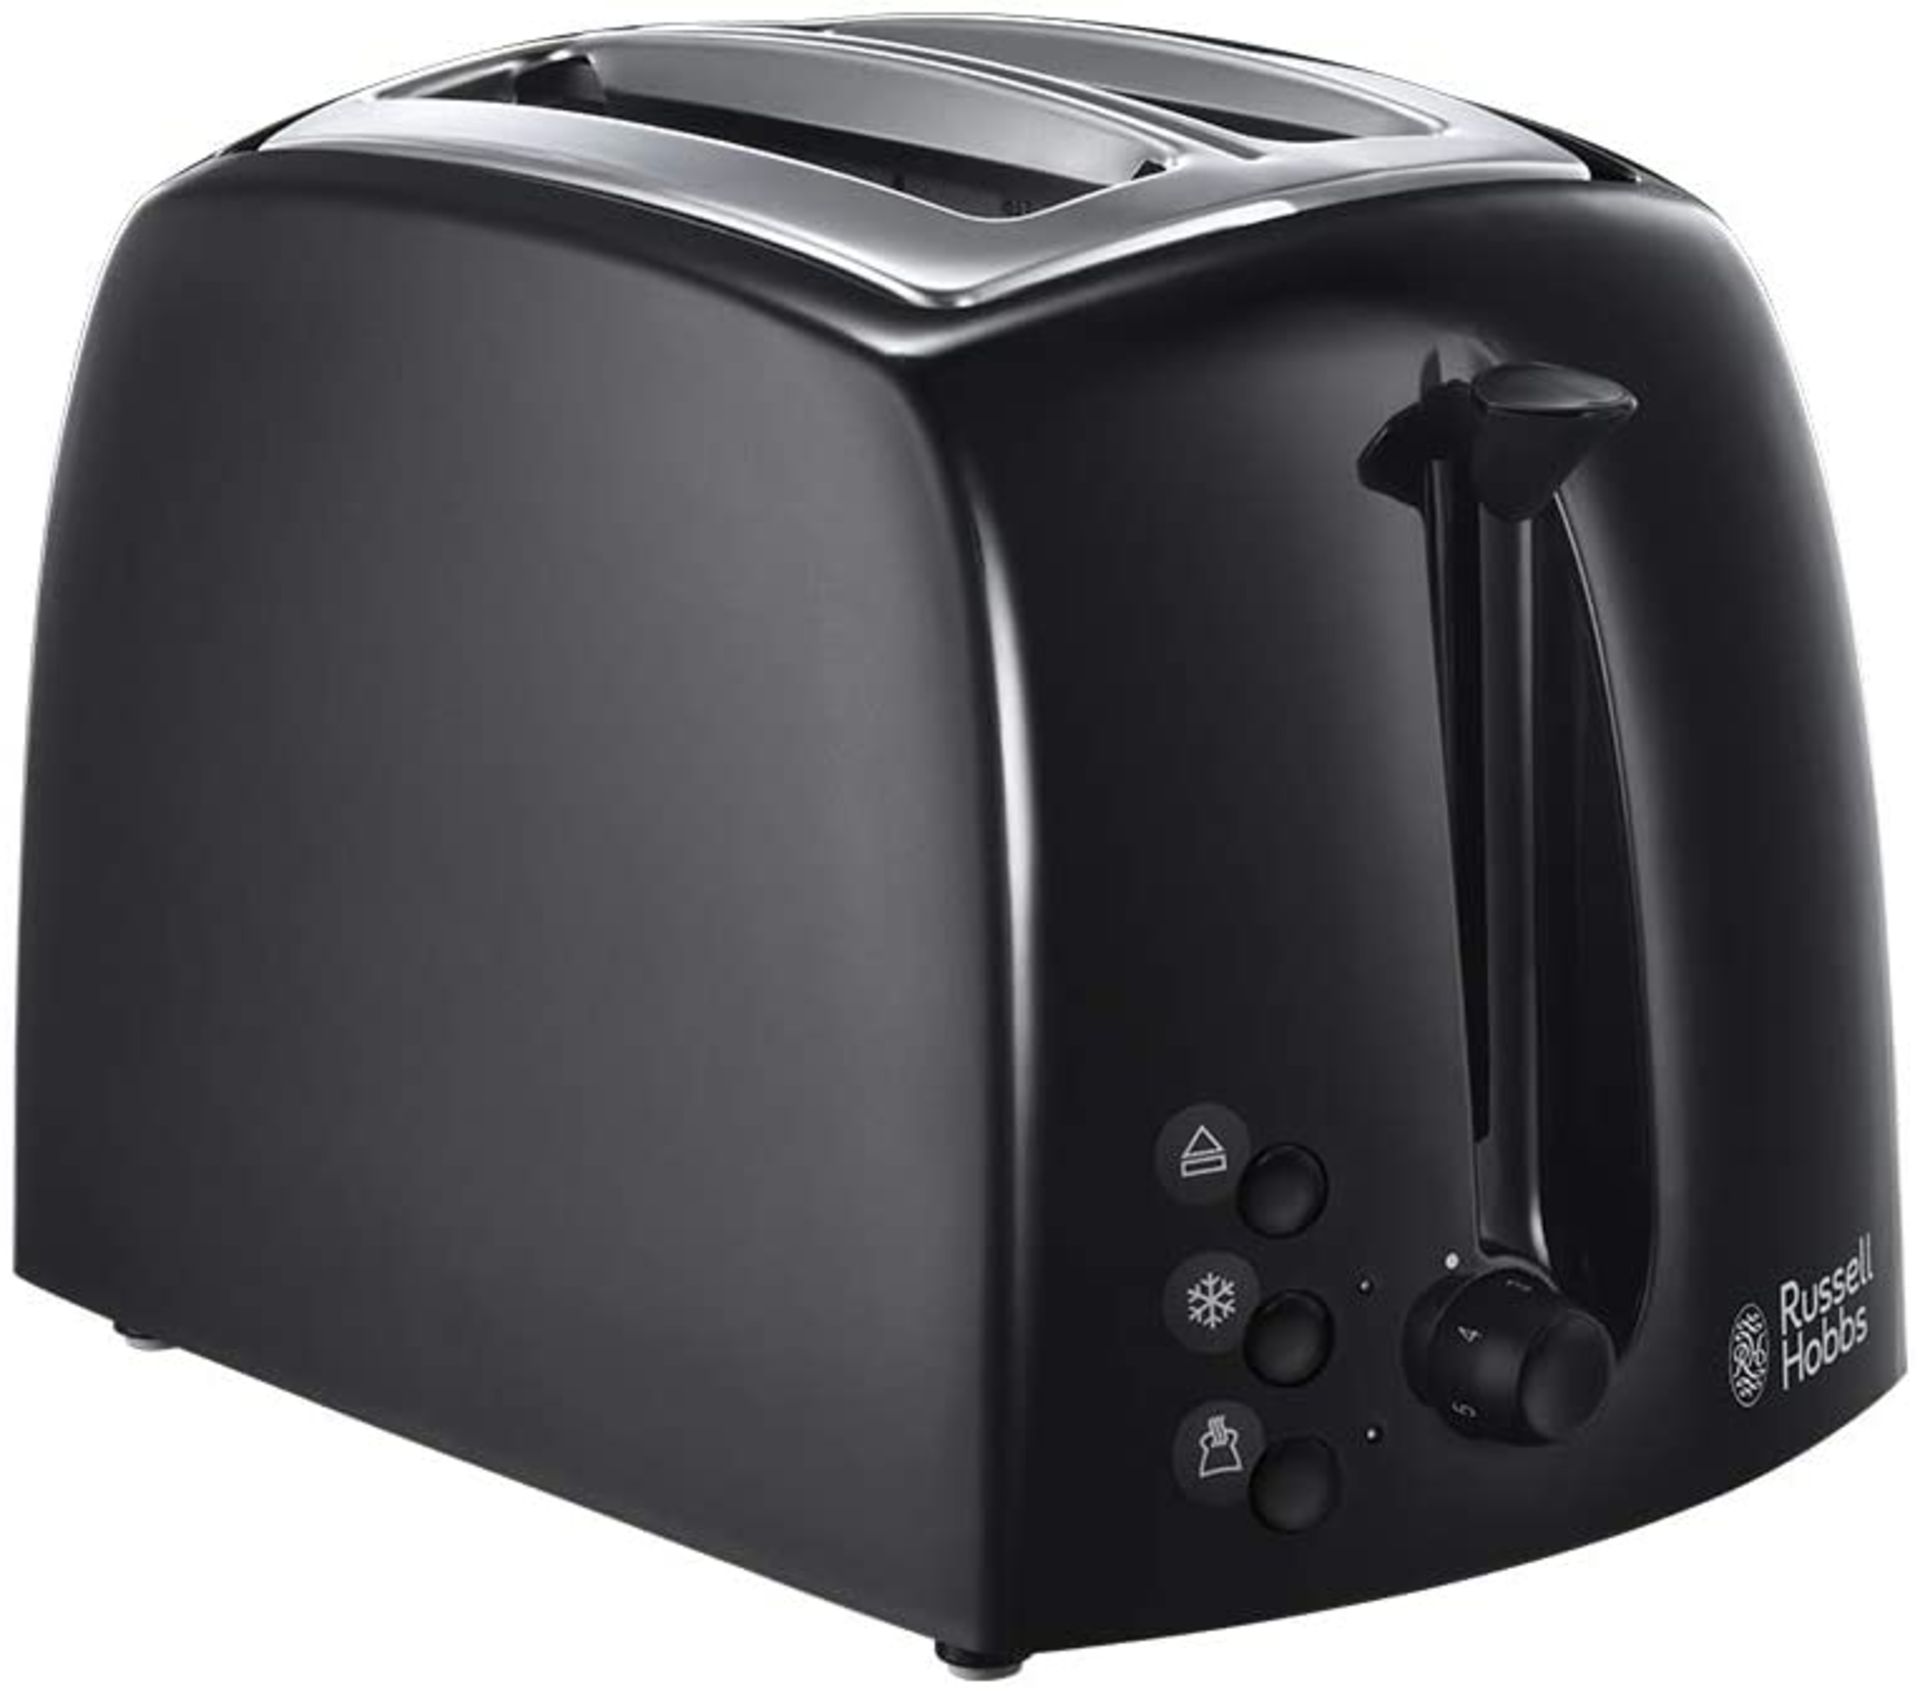 GRADE A Russell Hobbs Black 2 Slice Textures Toaster